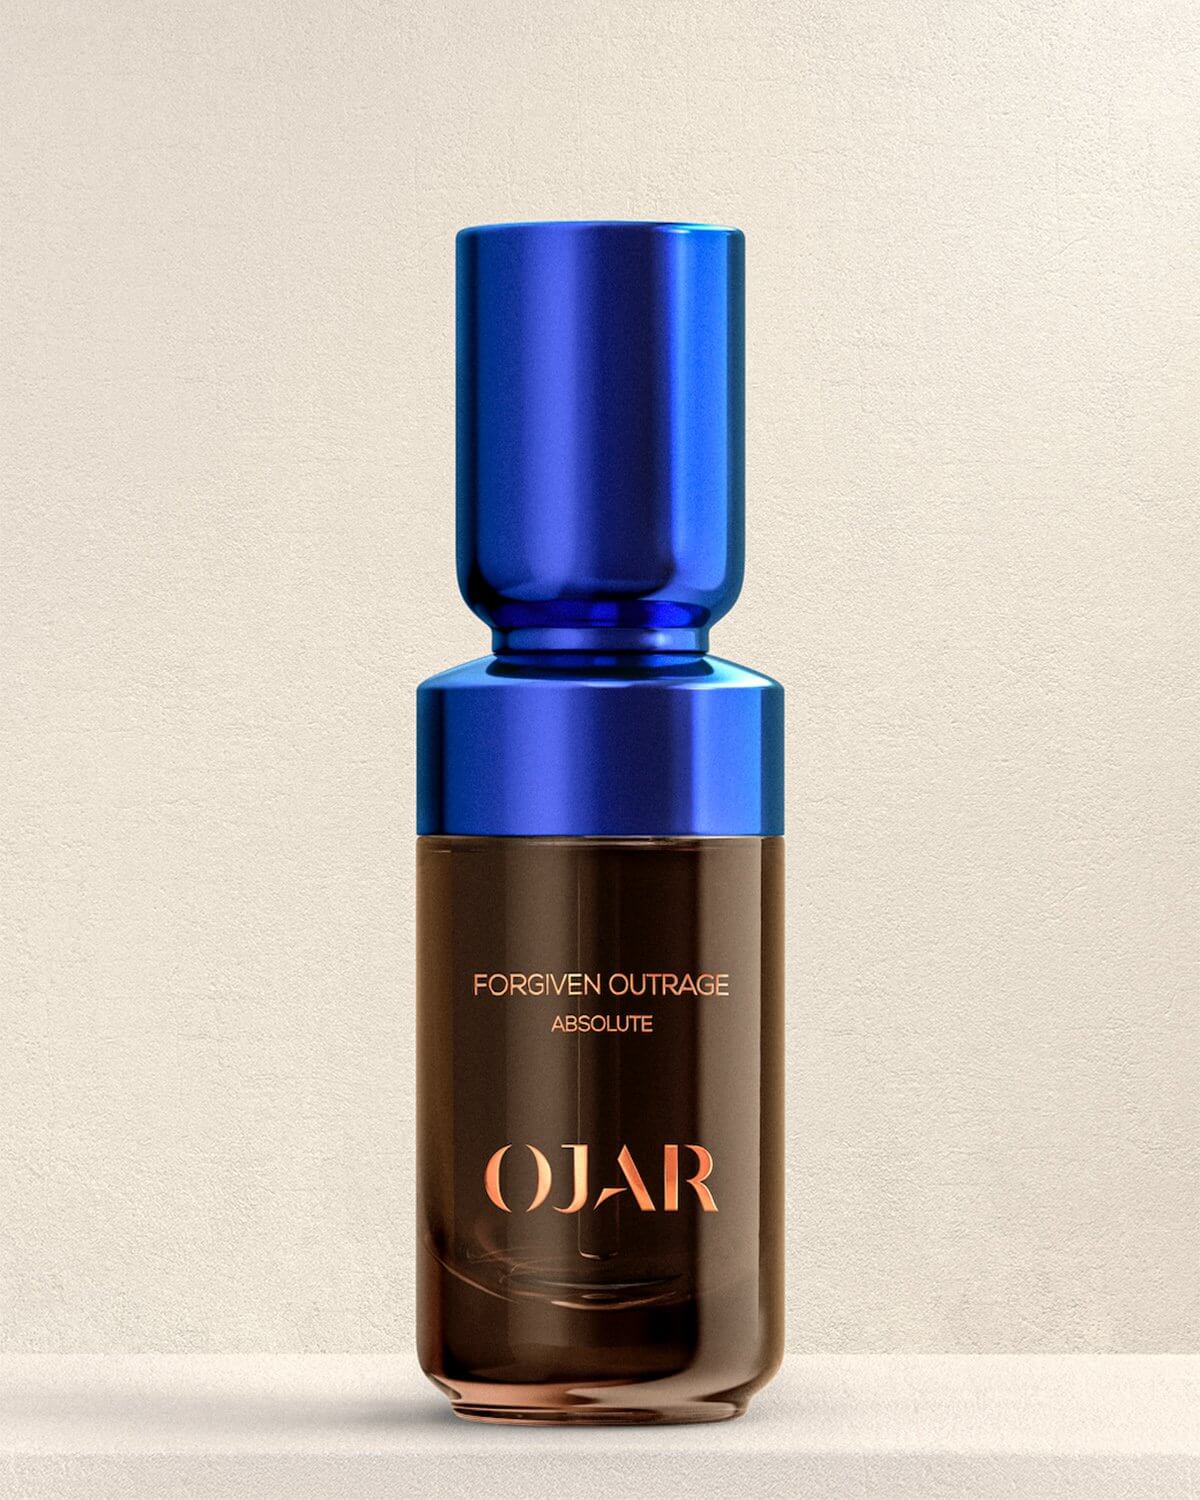 OJAR Absolute Forgiven Outrage Perfume